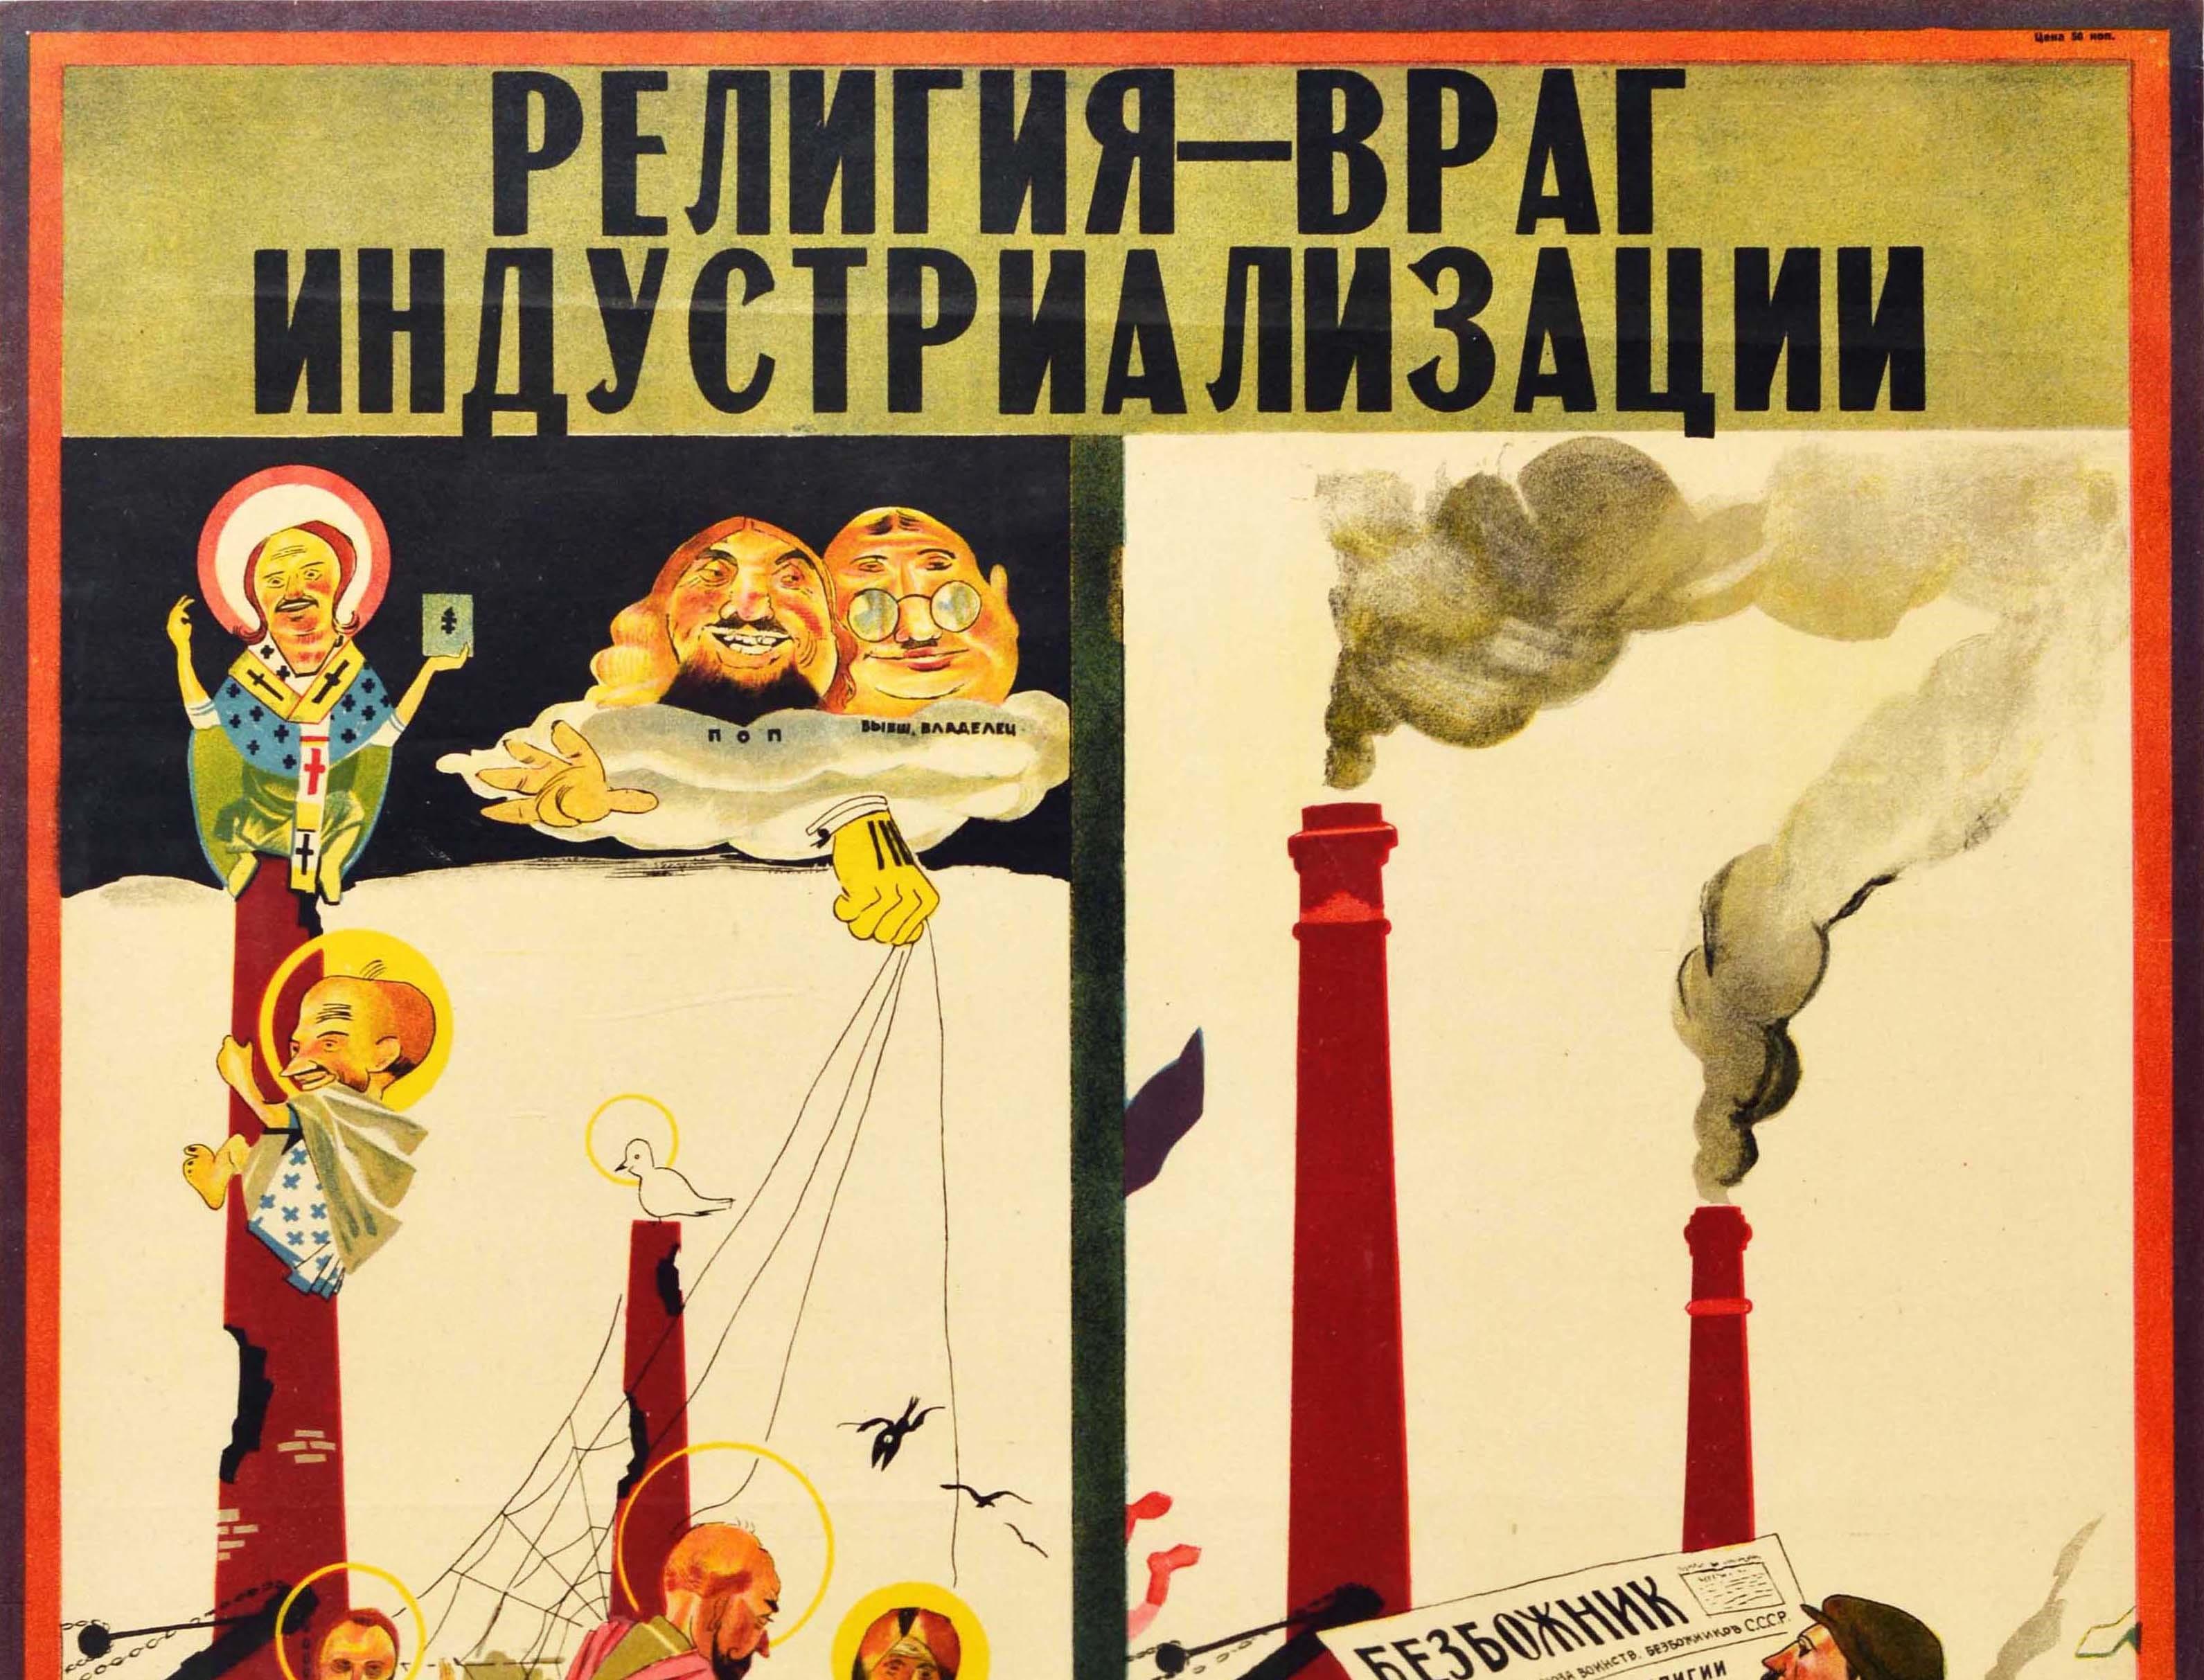 Original vintage Soviet propaganda poster - Religion is the Enemy of Industrialisation - featuring a worker reading a newspaper in front of industrial factories and a steam train on one half of the image with the headline text - Atheist Accelerate